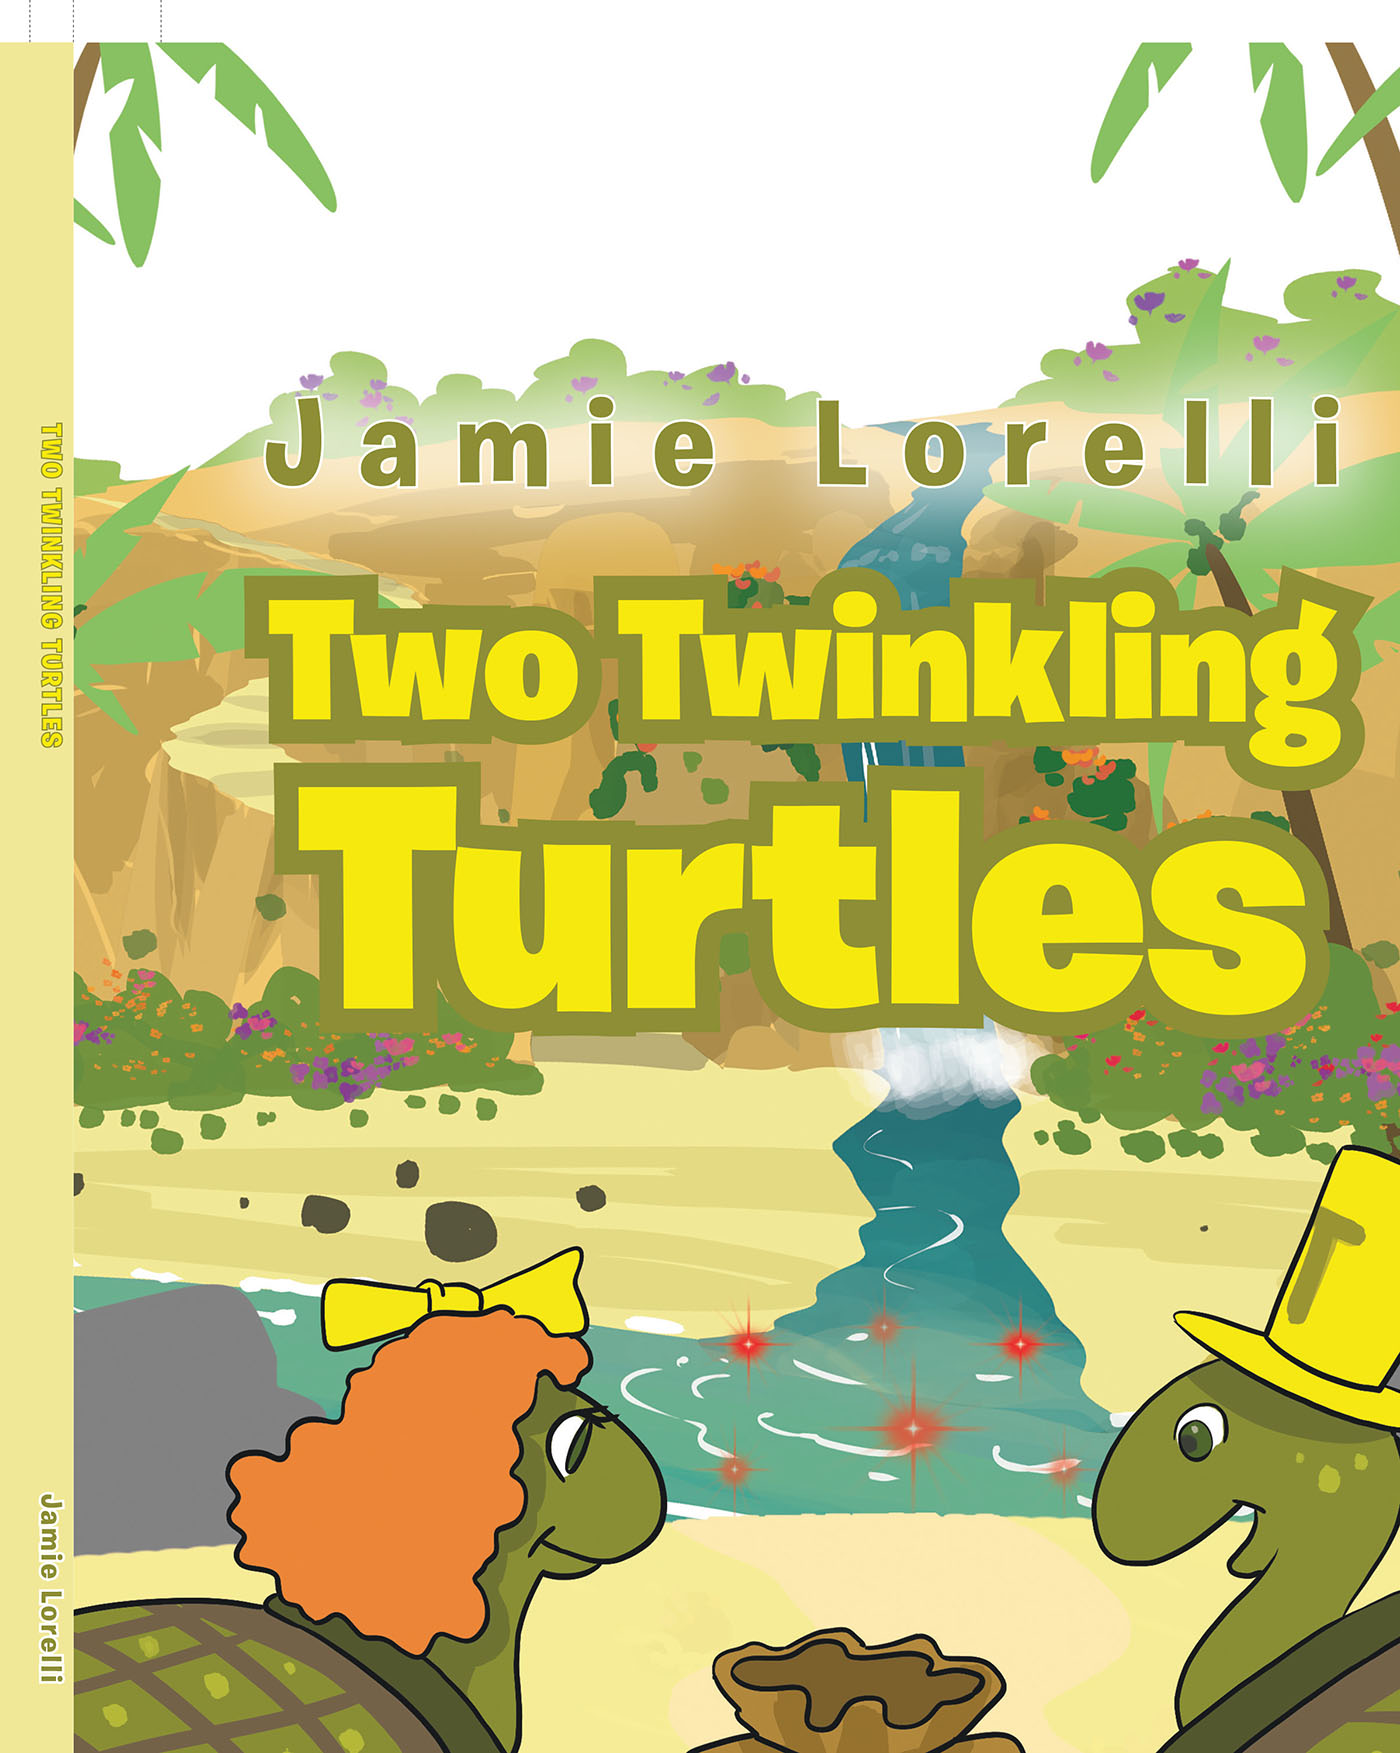 Jamie Lorelli’s Newly Released "Two Twinkling Turtles" is a Sweet Story of a Local Talent Show and Two Uncertain Turtles Searching for a Talent to Showcase